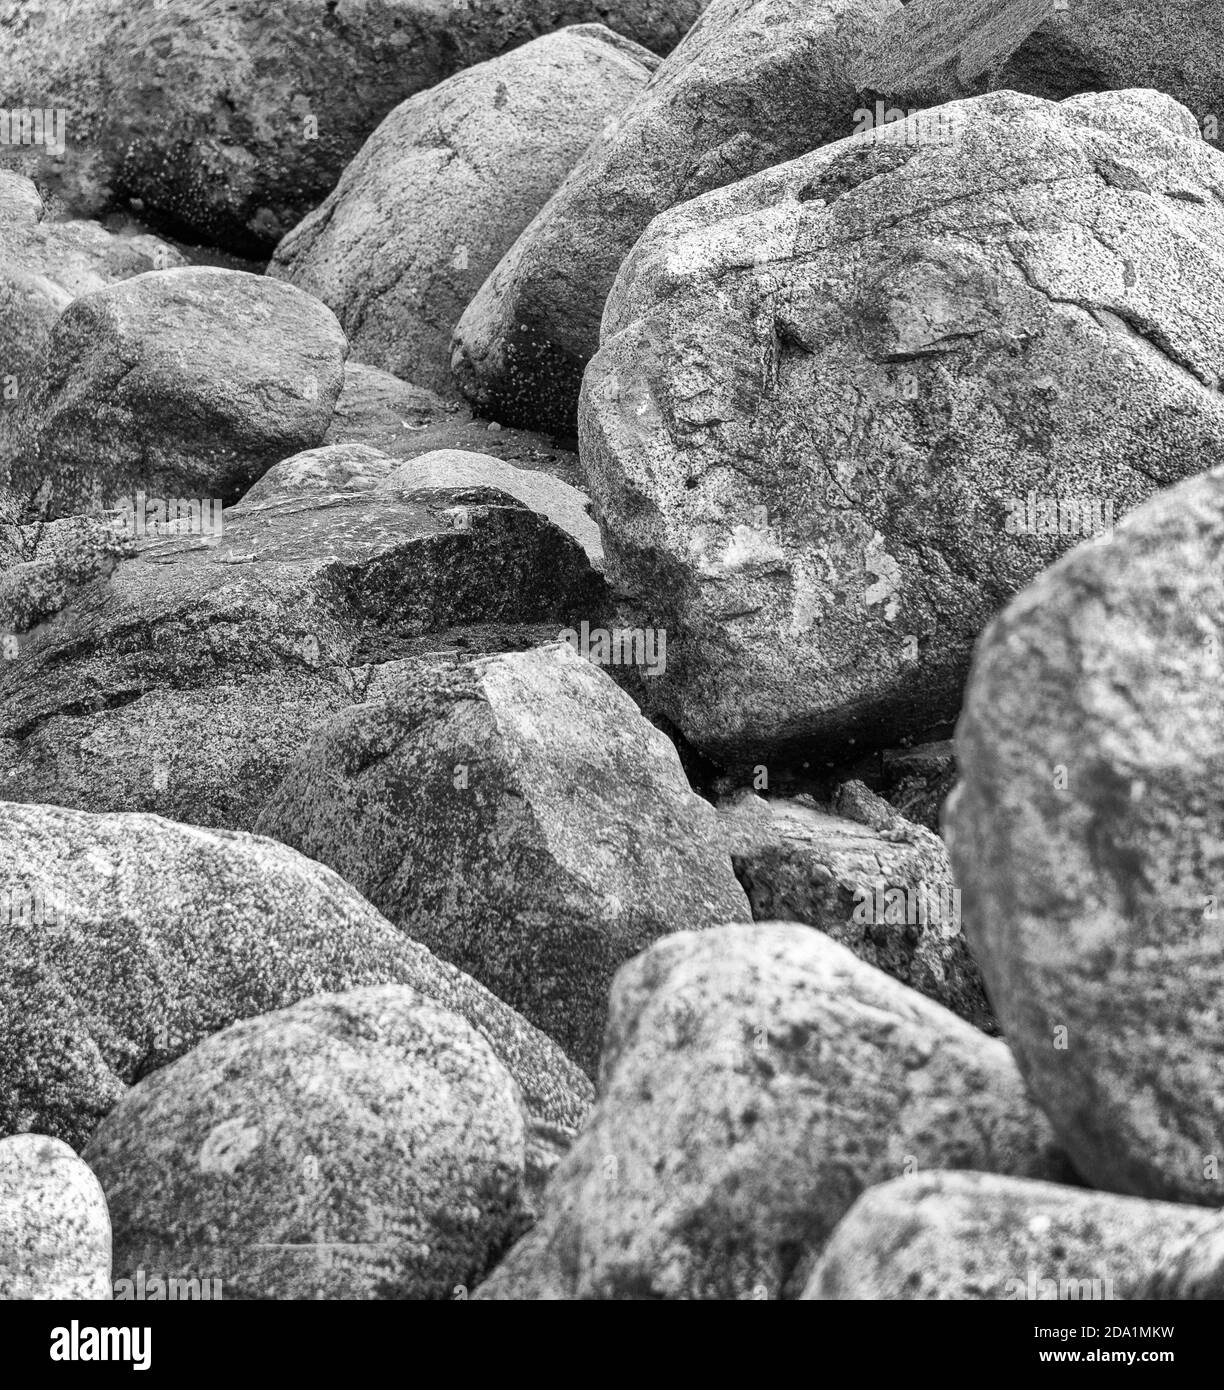 boulders Vancouver BC Stock Photo